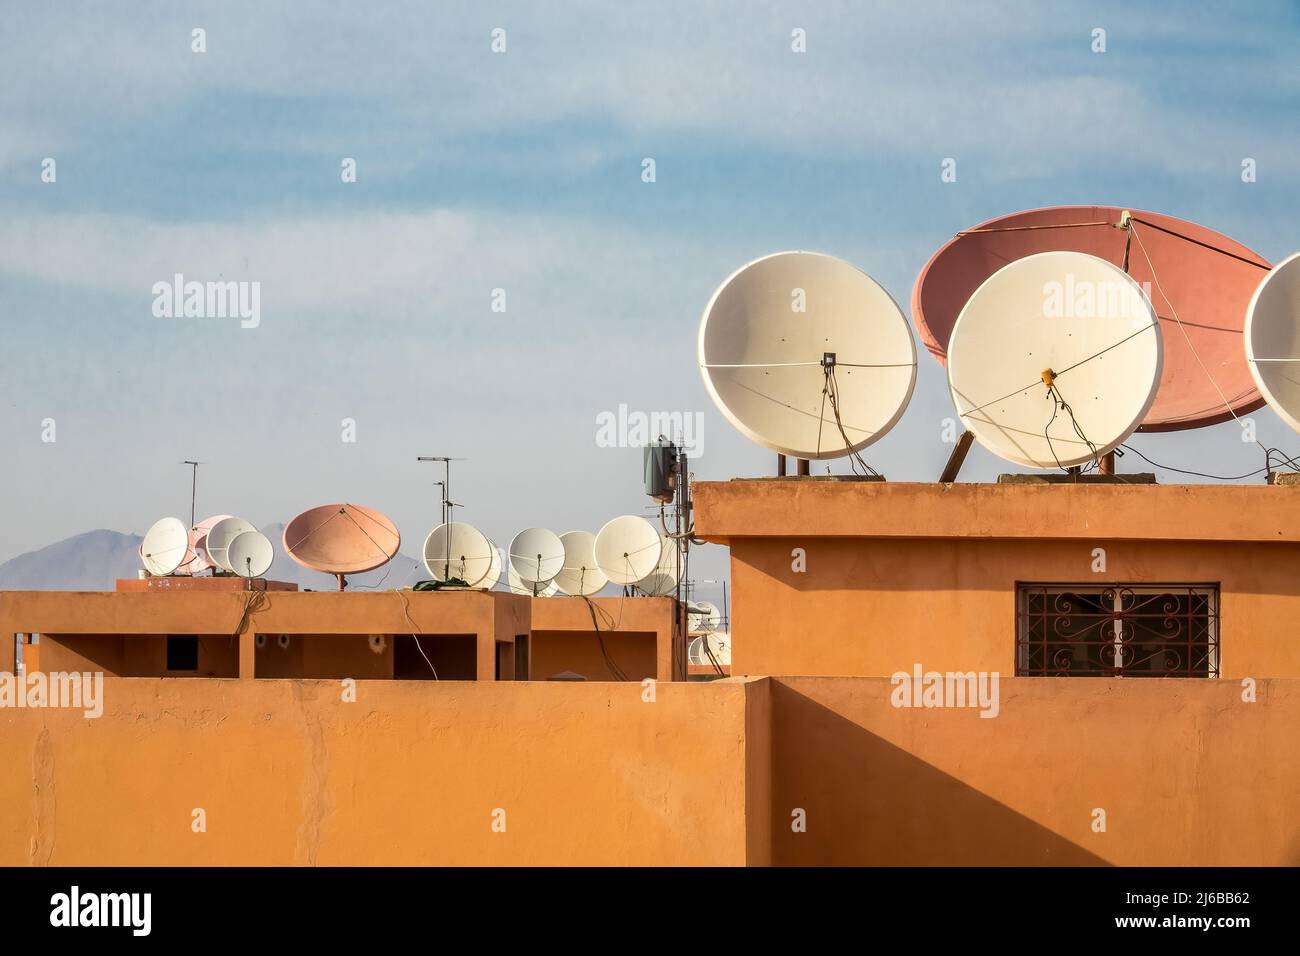 Many dish antennas on rooftops in a town in Morocco Stock Photo